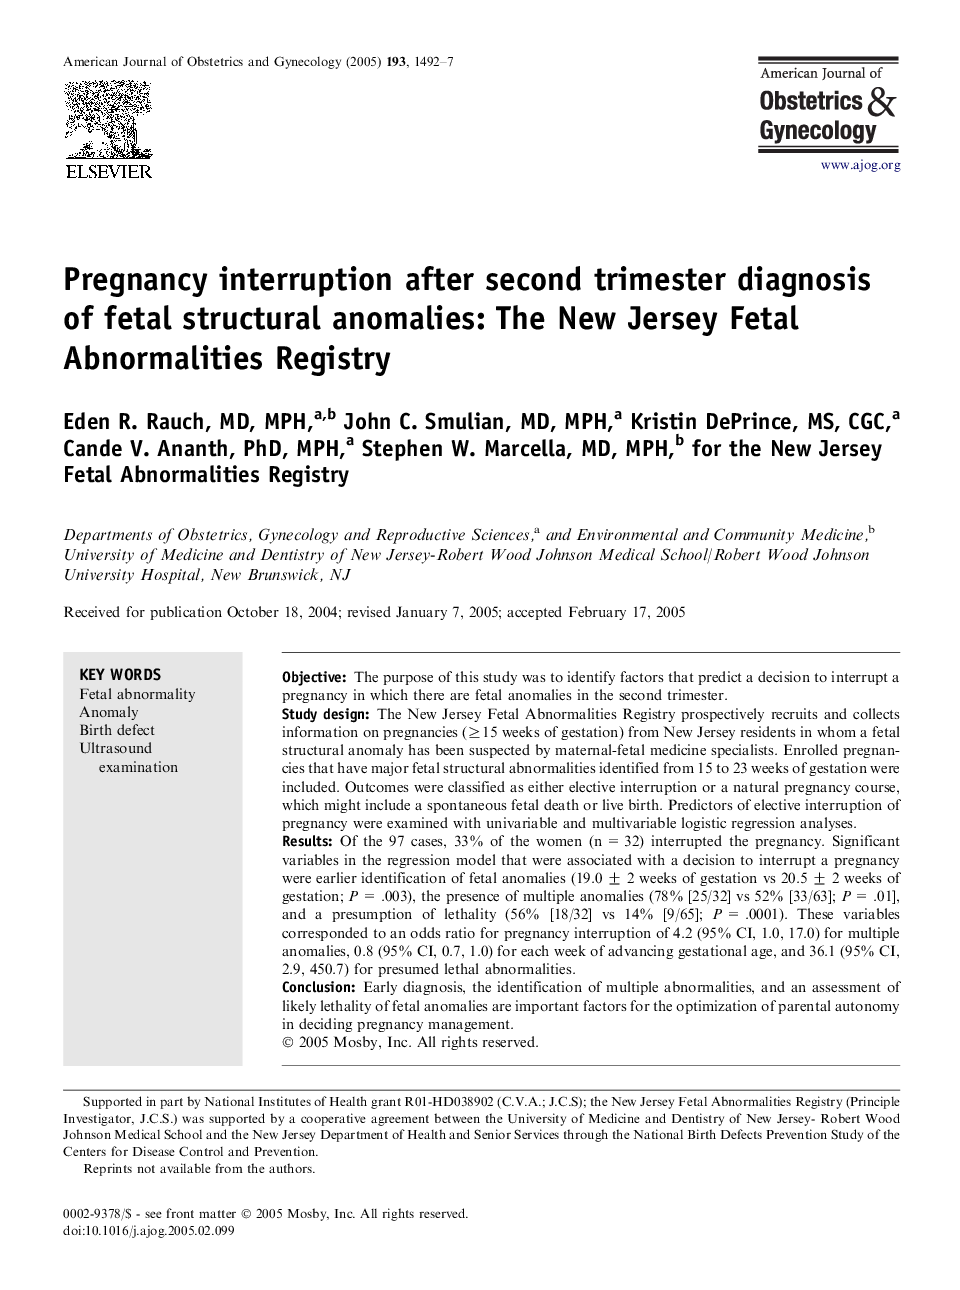 Pregnancy interruption after second trimester diagnosis of fetal structural anomalies: The New Jersey Fetal Abnormalities Registry